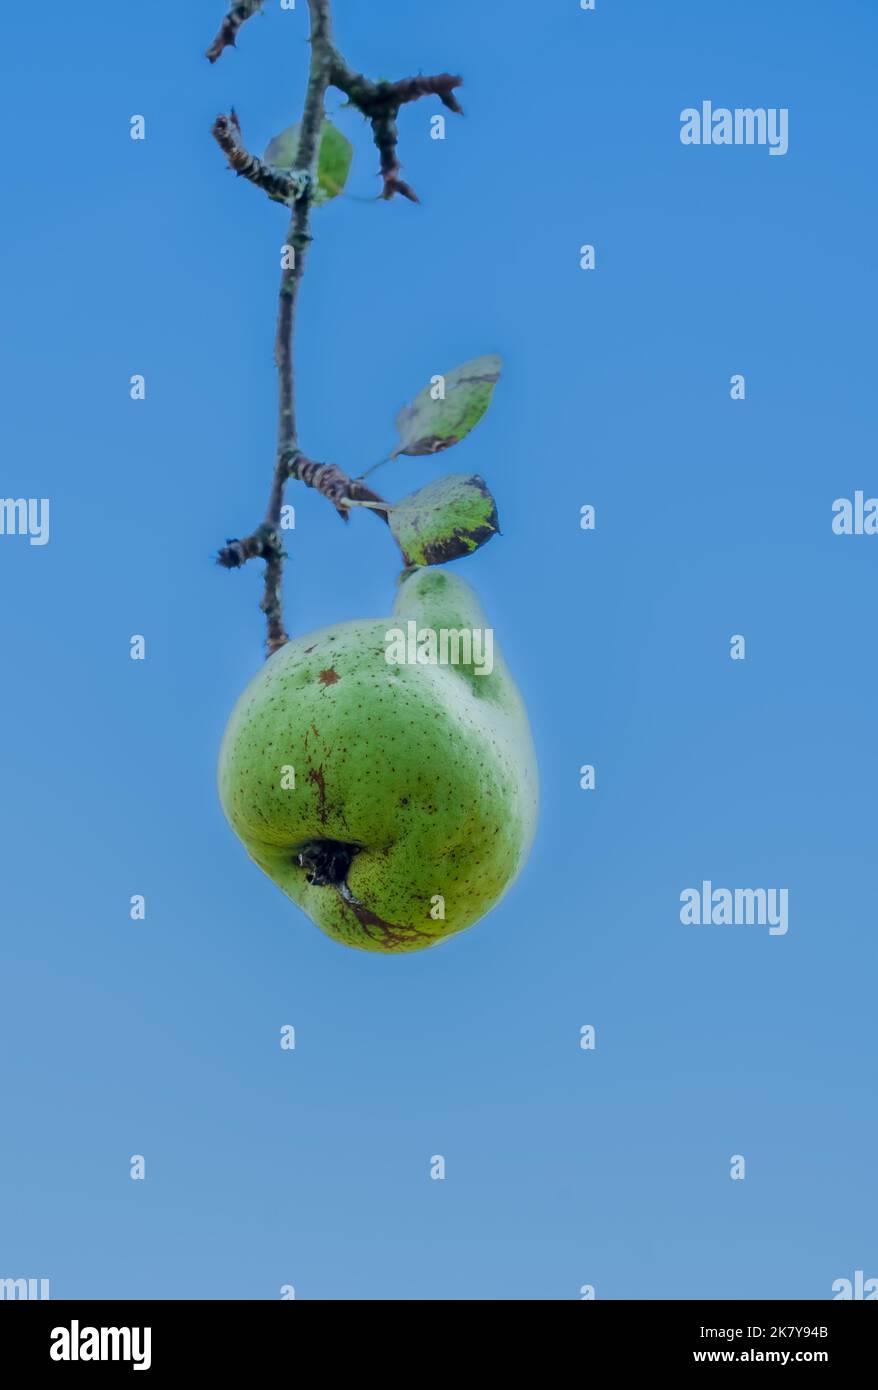 detailed close-up of a single hanging Common Pear (Pyrus communis) under a clear blue sky Stock Photo